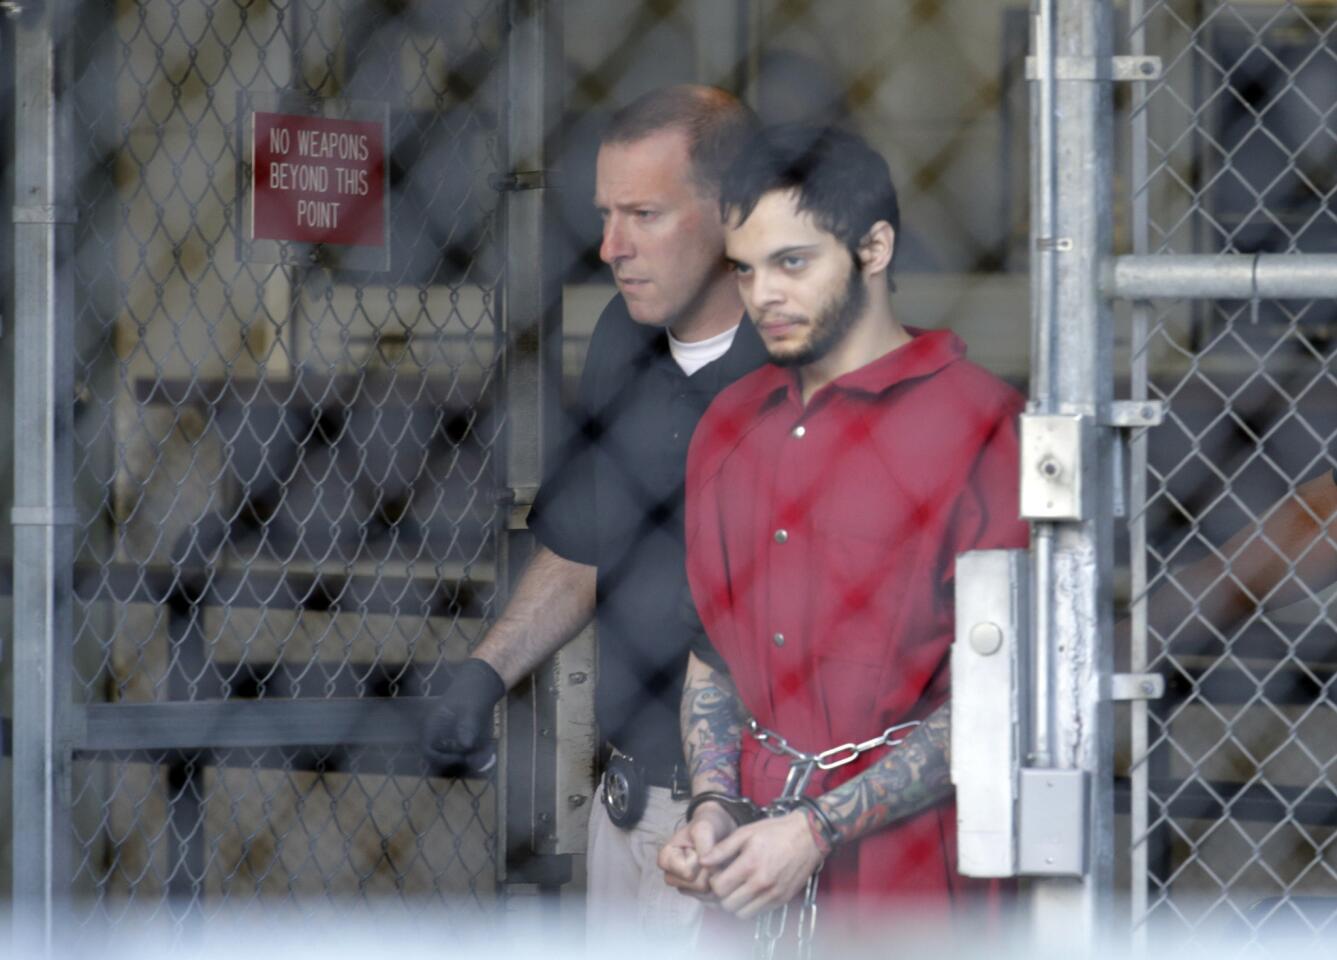 Esteban Santiago leaves the Broward County jail for a hearing in federal court, Tuesday, Jan. 17, 2017, in Fort Lauderdale, Fla. Santiago has been charged with committing violence against people at an international airport resulting in death and two firearms offenses, following a shooting at the Fort Lauderdale-Hollywood International Airport Jan. 6. (AP Photo/Lynne Sladky)